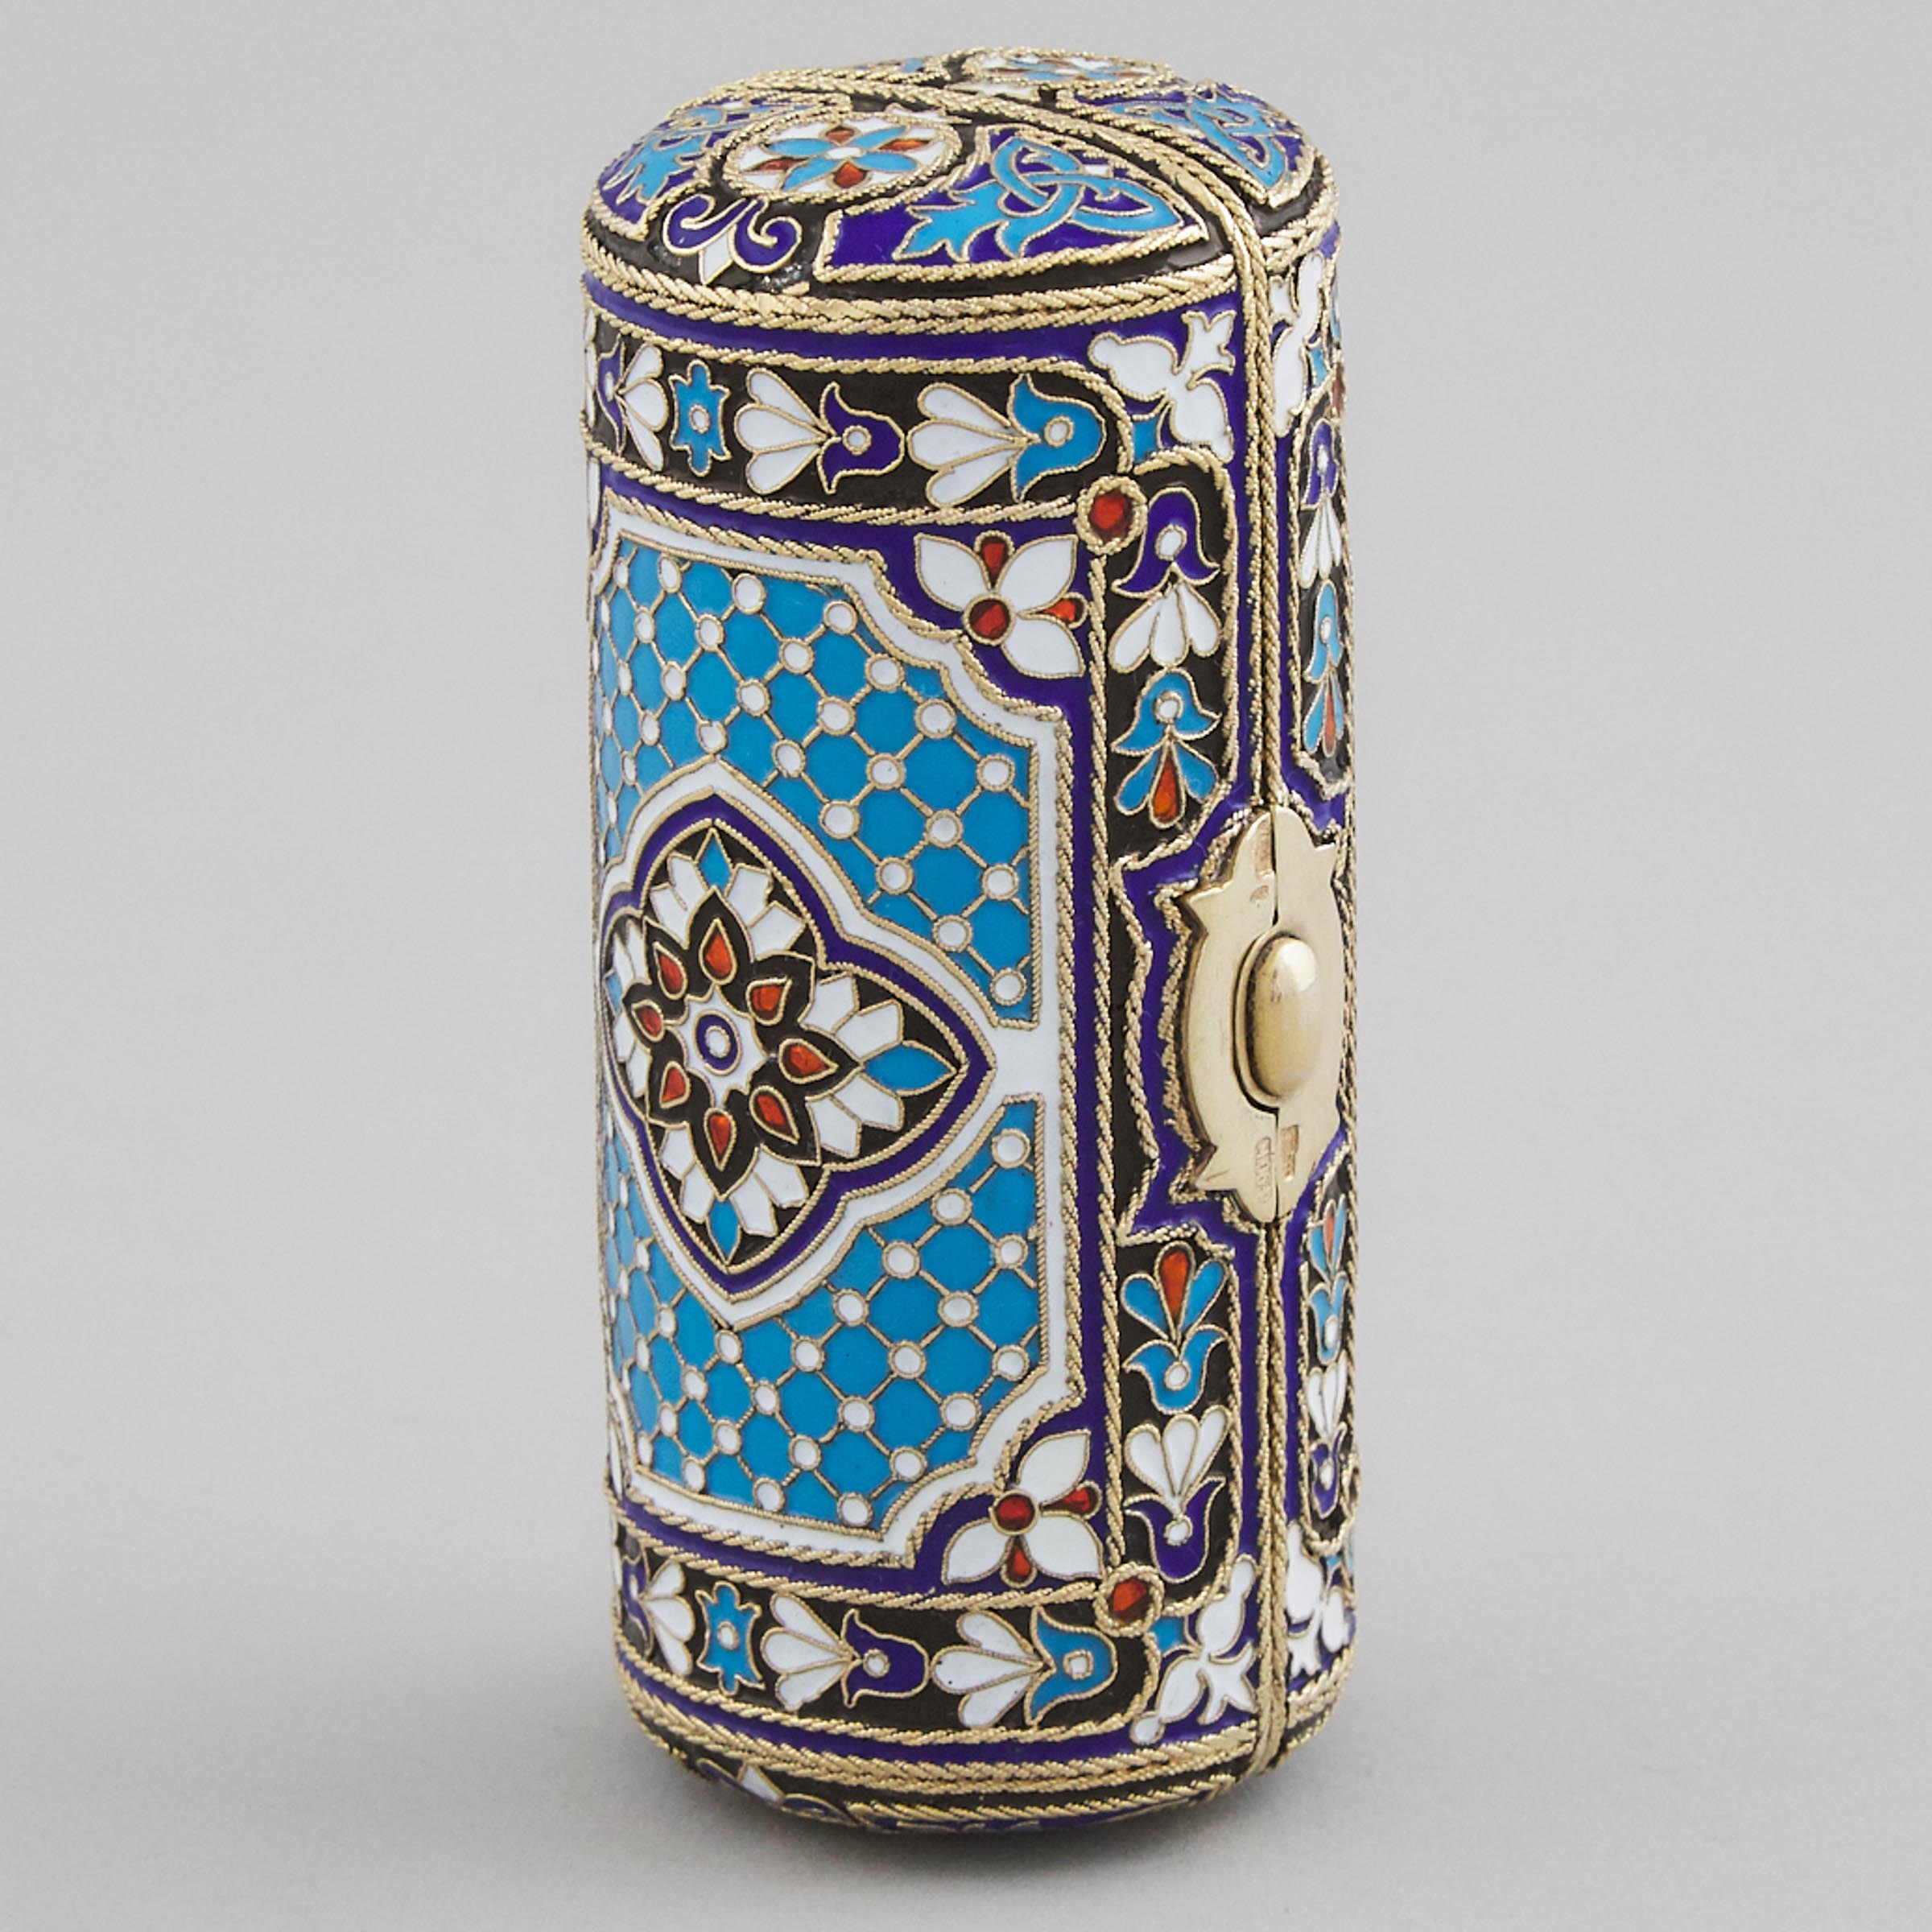 Russian Silver and Cloisonné Enamel Cylindrical Cigarette Case, Ivan Khlebnikov, Moscow, 1883(?)